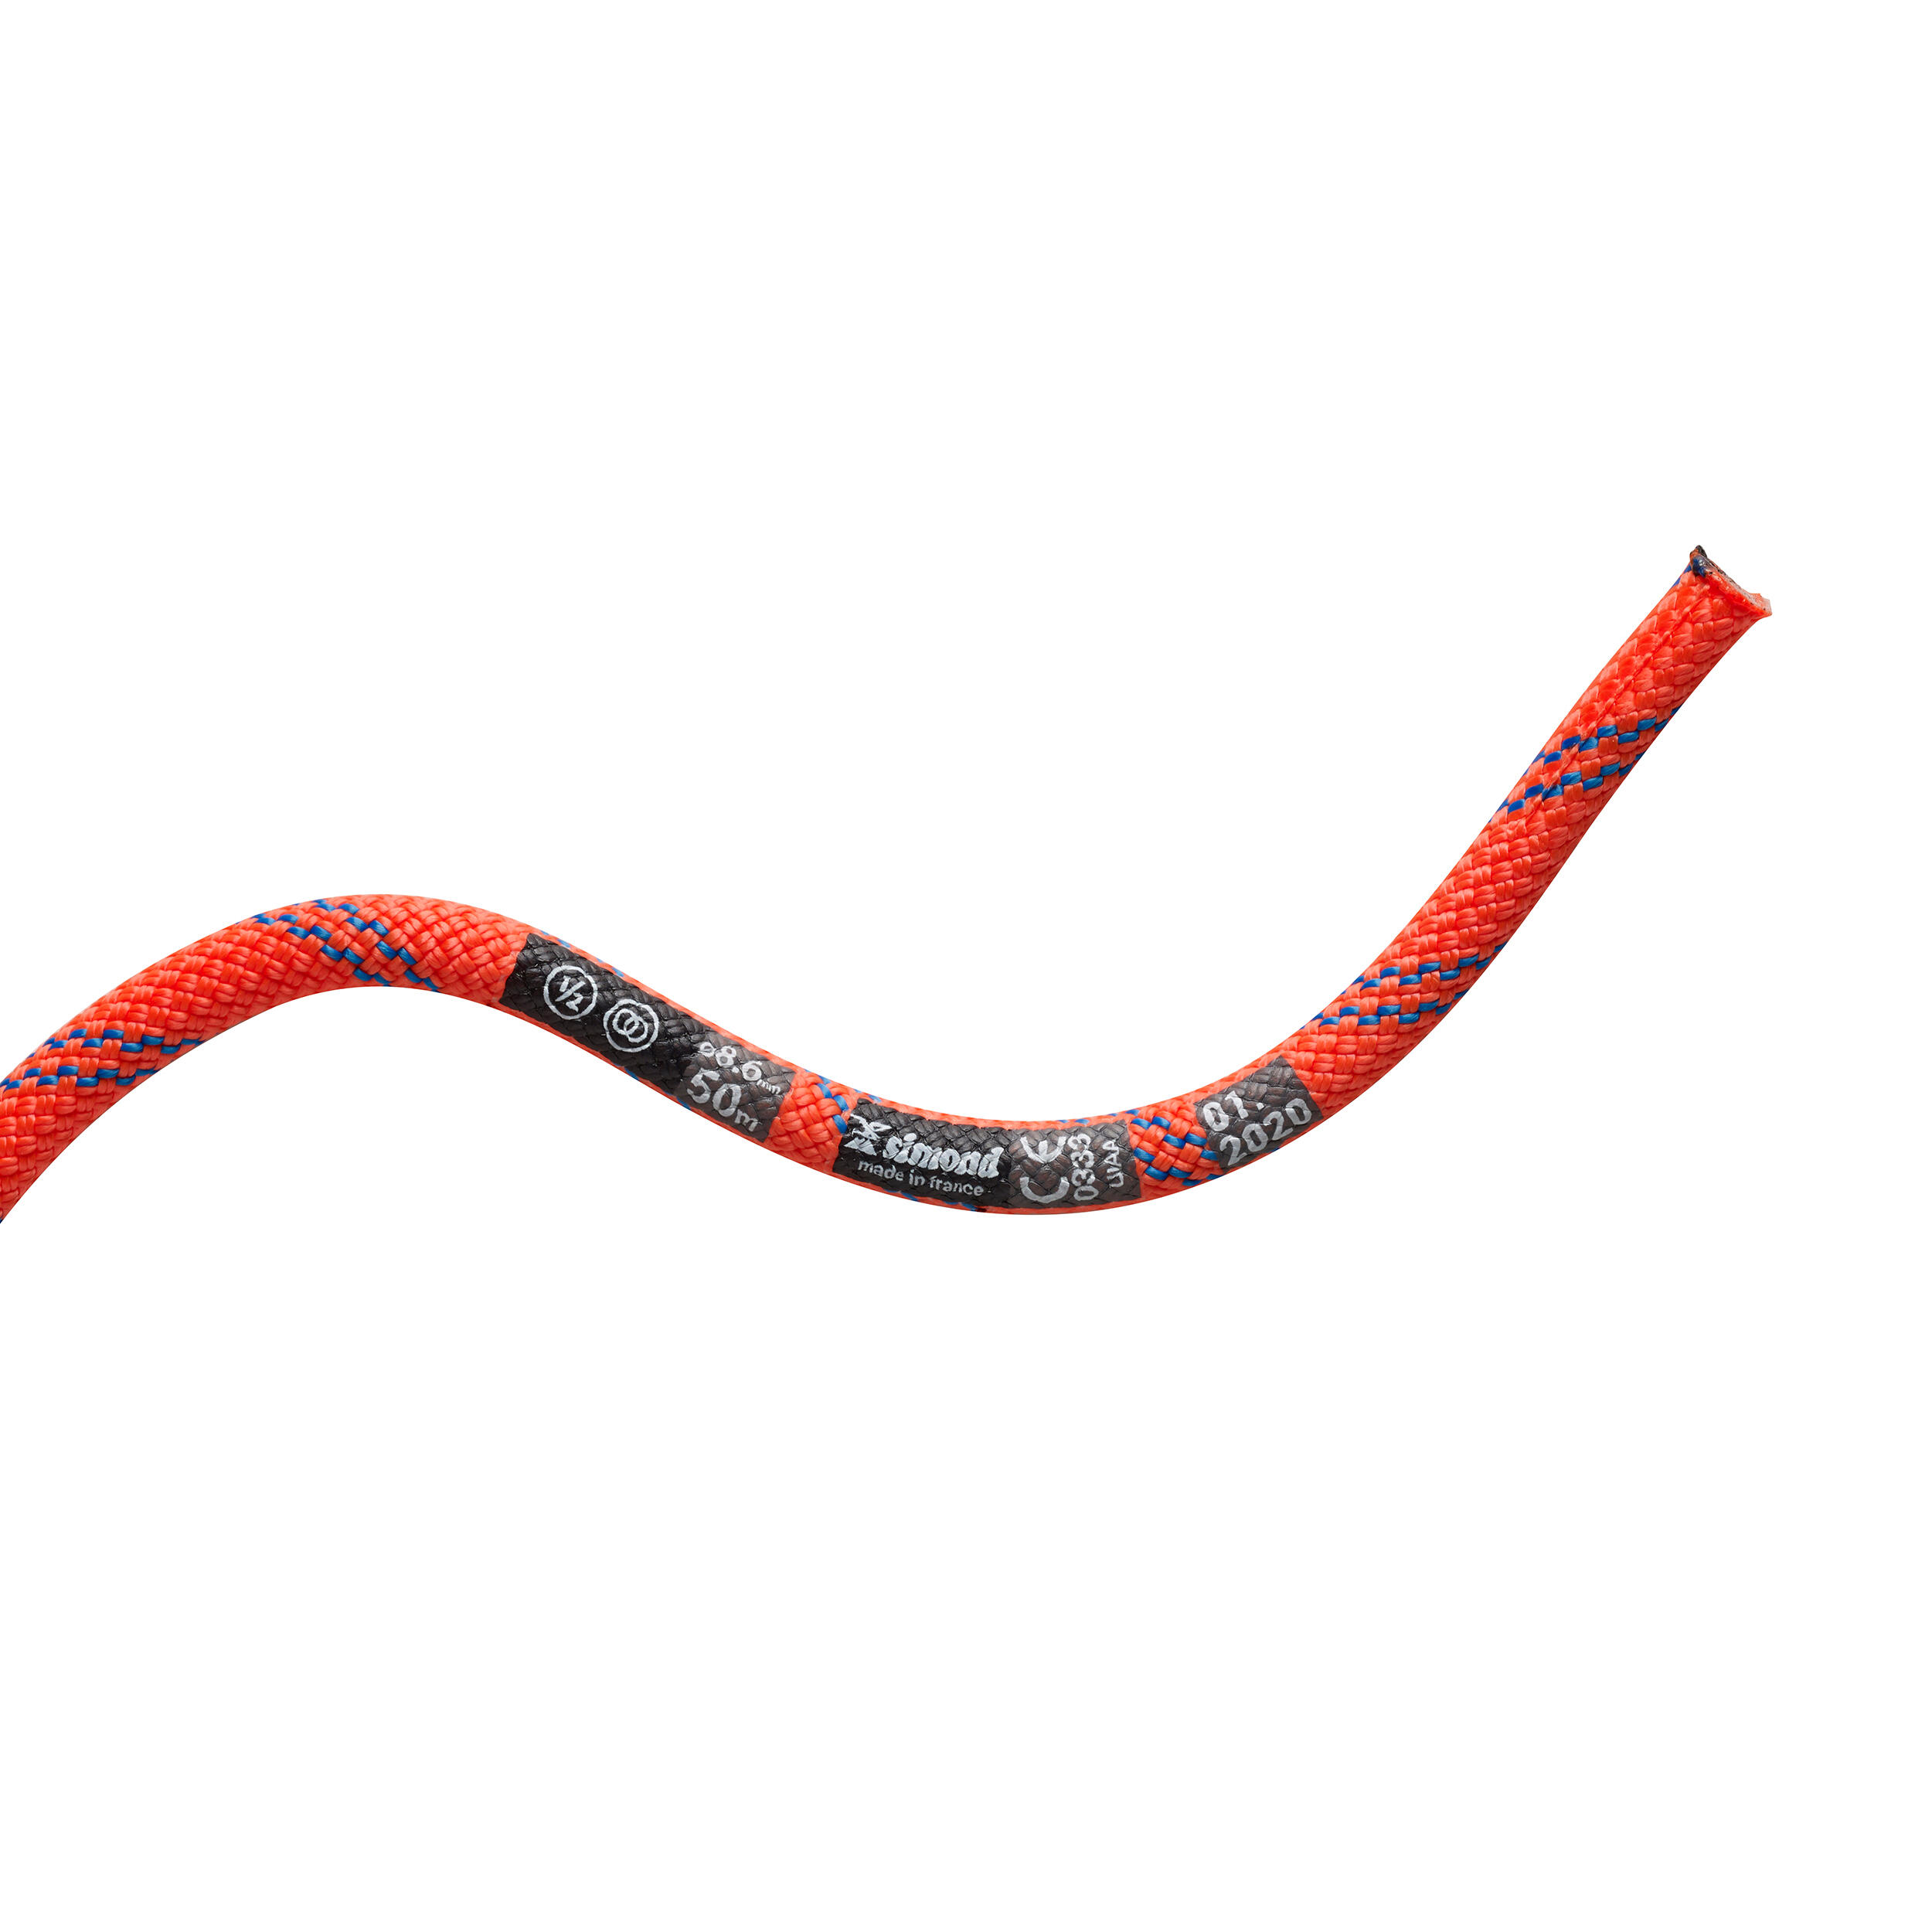 Climbing and mountaineering half rope 8.6 mm x 50 m - RAPPEL 8.6 orange 4/6